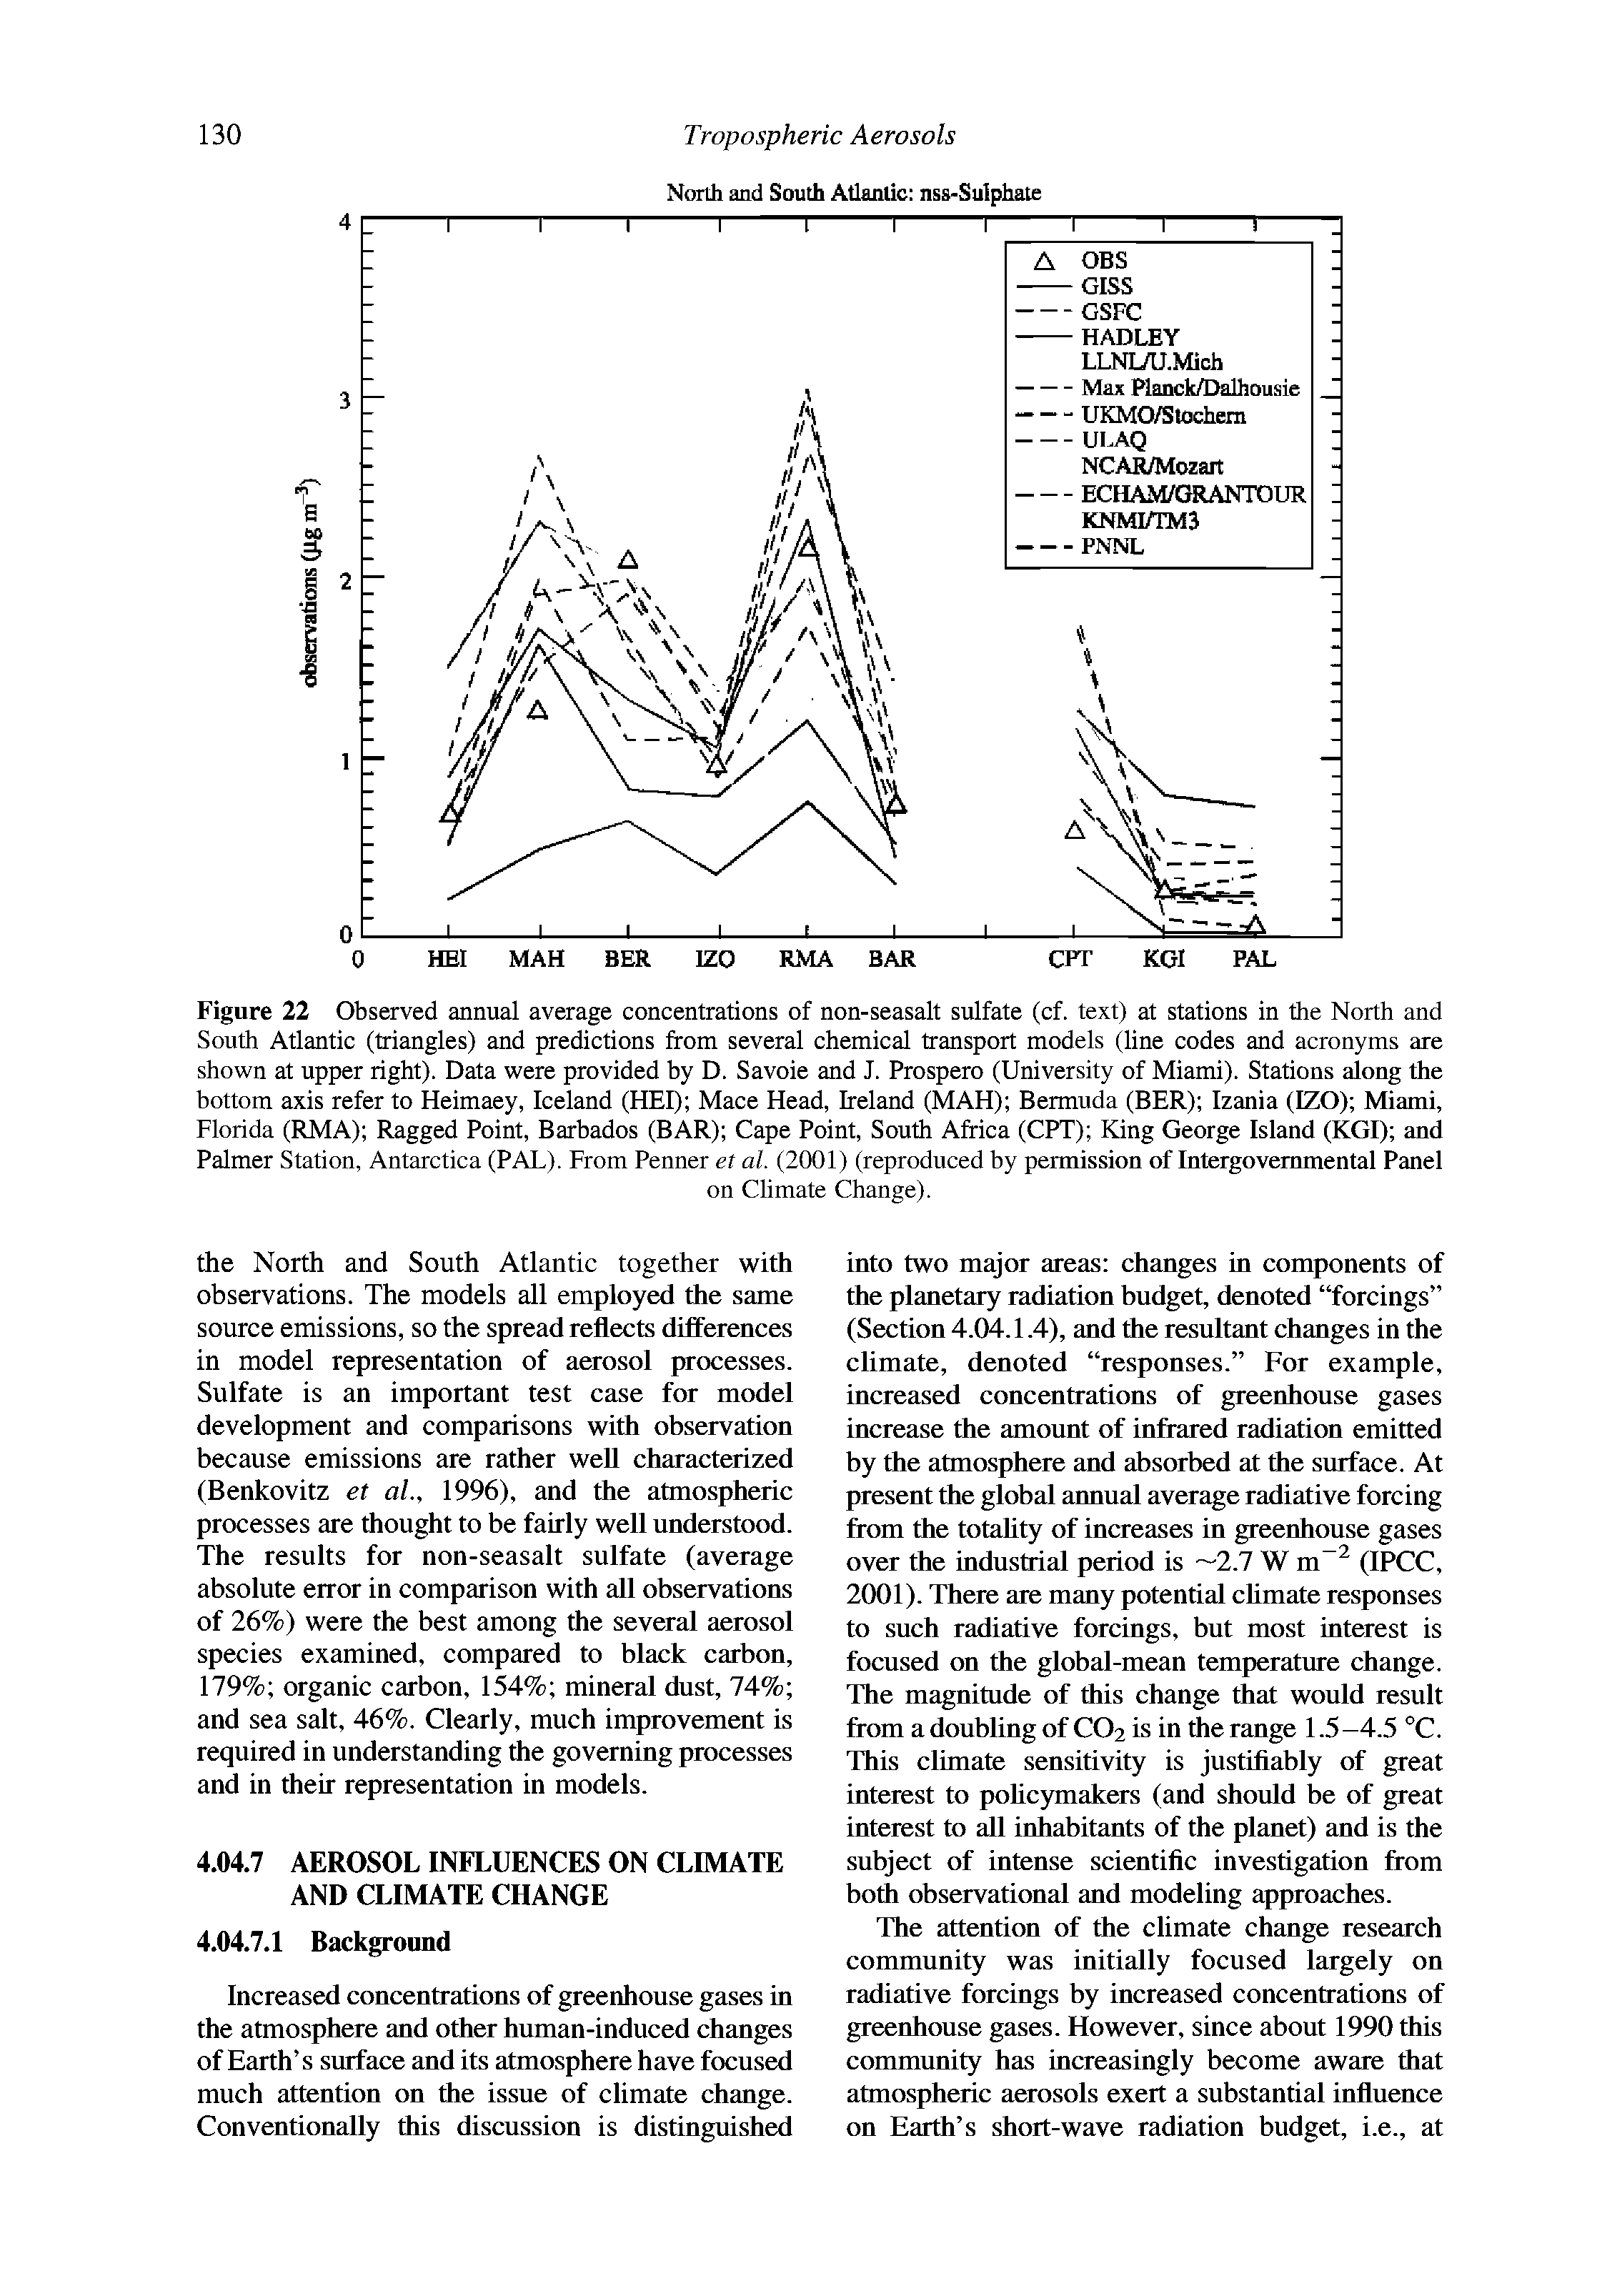 Figure 22 Observed annual average concentrations of non-seasalt sulfate (cf. text) at stations in the North and South Atlantic (triangles) and predictions from several chemical transport models (line codes and acronyms are shown at upper right). Data were provided by D. Savoie and J. Prospero (University of Miami). Stations along the bottom axis refer to Heimaey, Iceland (HEI) Mace Head, Ireland (MAH) Bermuda (BER) Izania (IZO) Miami, Florida (RMA) Ragged Point, Barbados (BAR) Cape Point, South Africa (CPT) King George Island (KGI) and Palmer Station, Antarctica (PAL). From Penner et al. (2001) (reproduced by permission of Intergovernmental Panel...